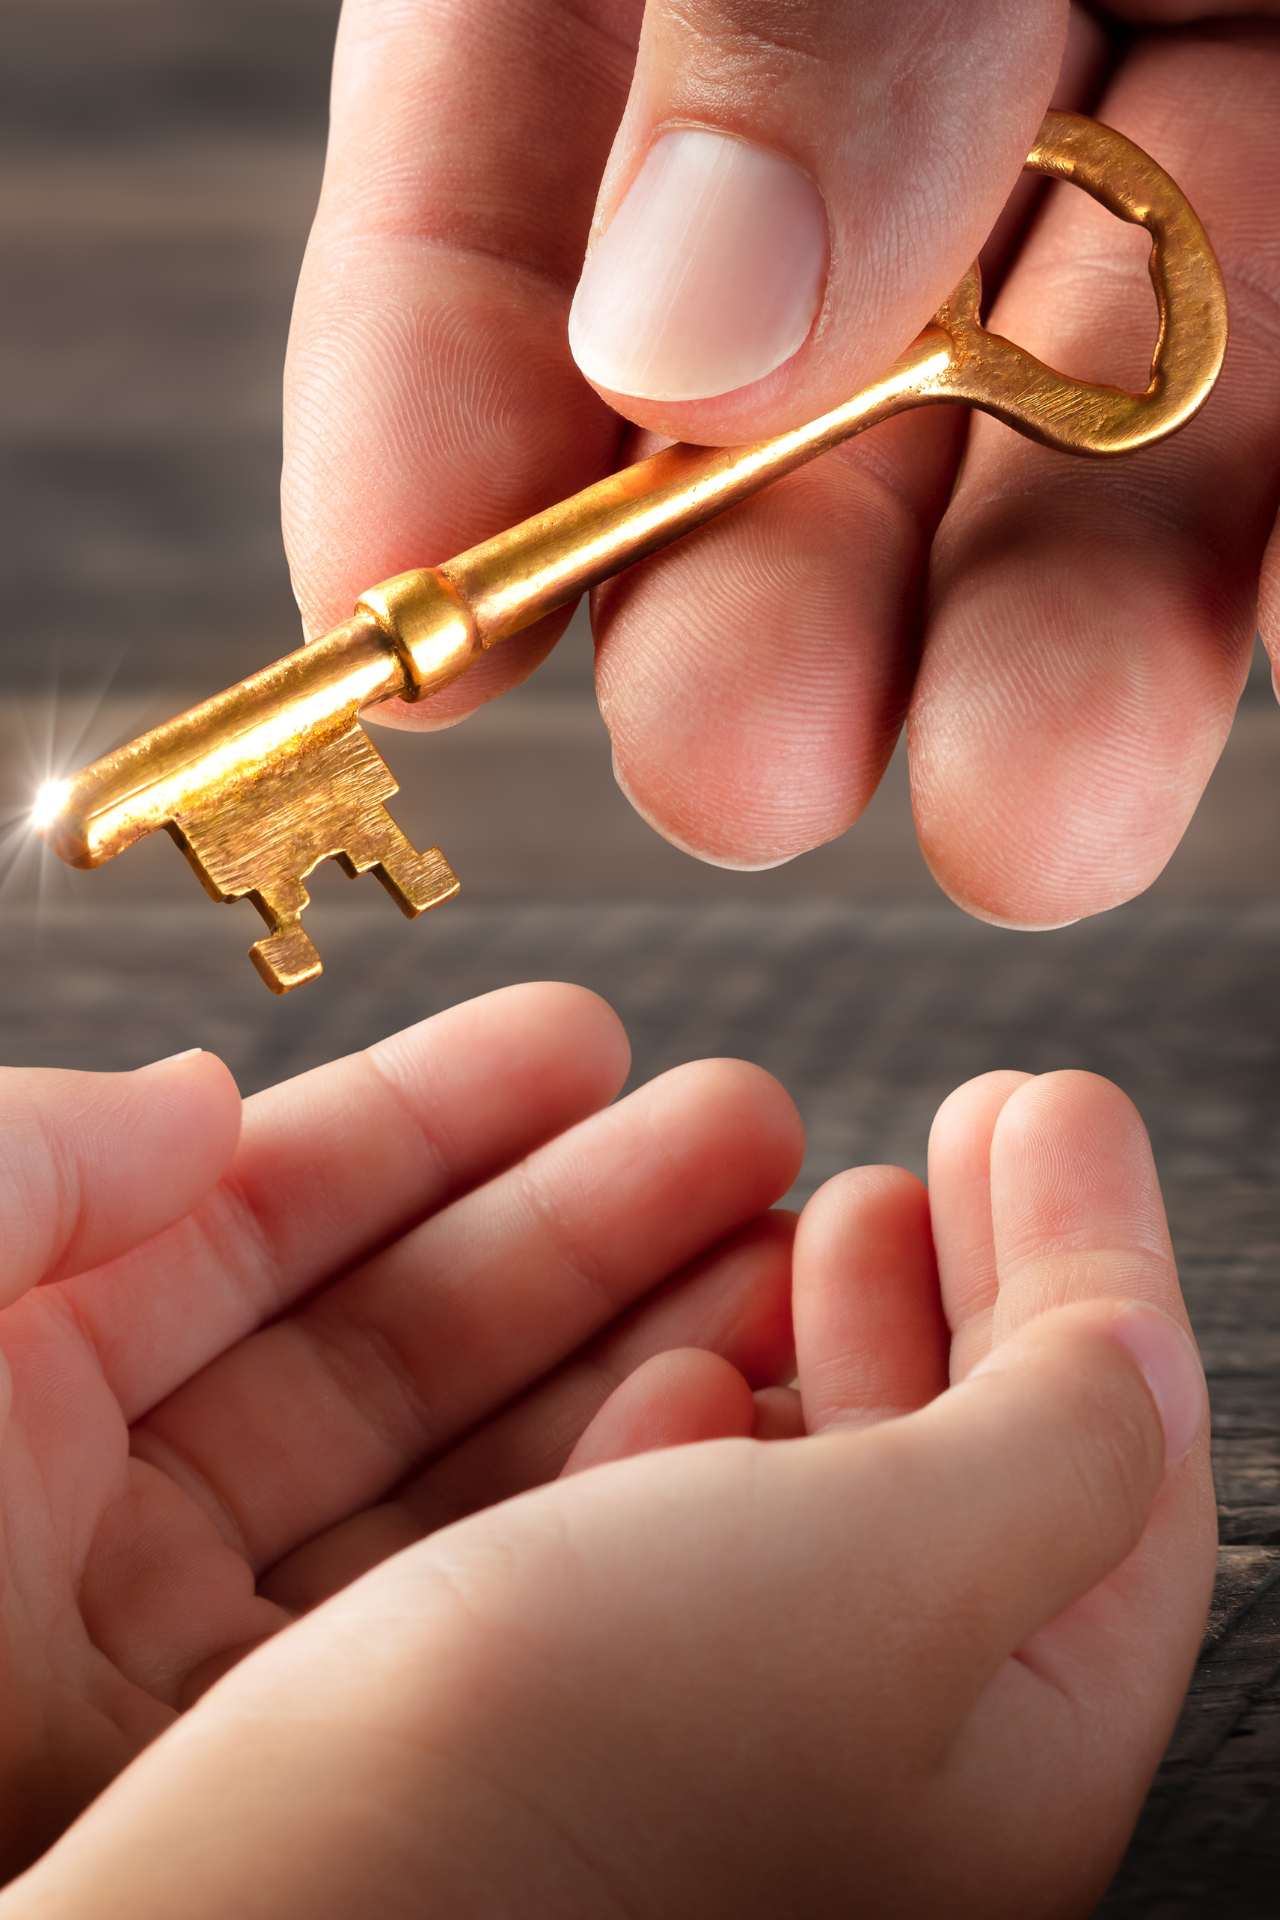 adult handing a gold key to a child